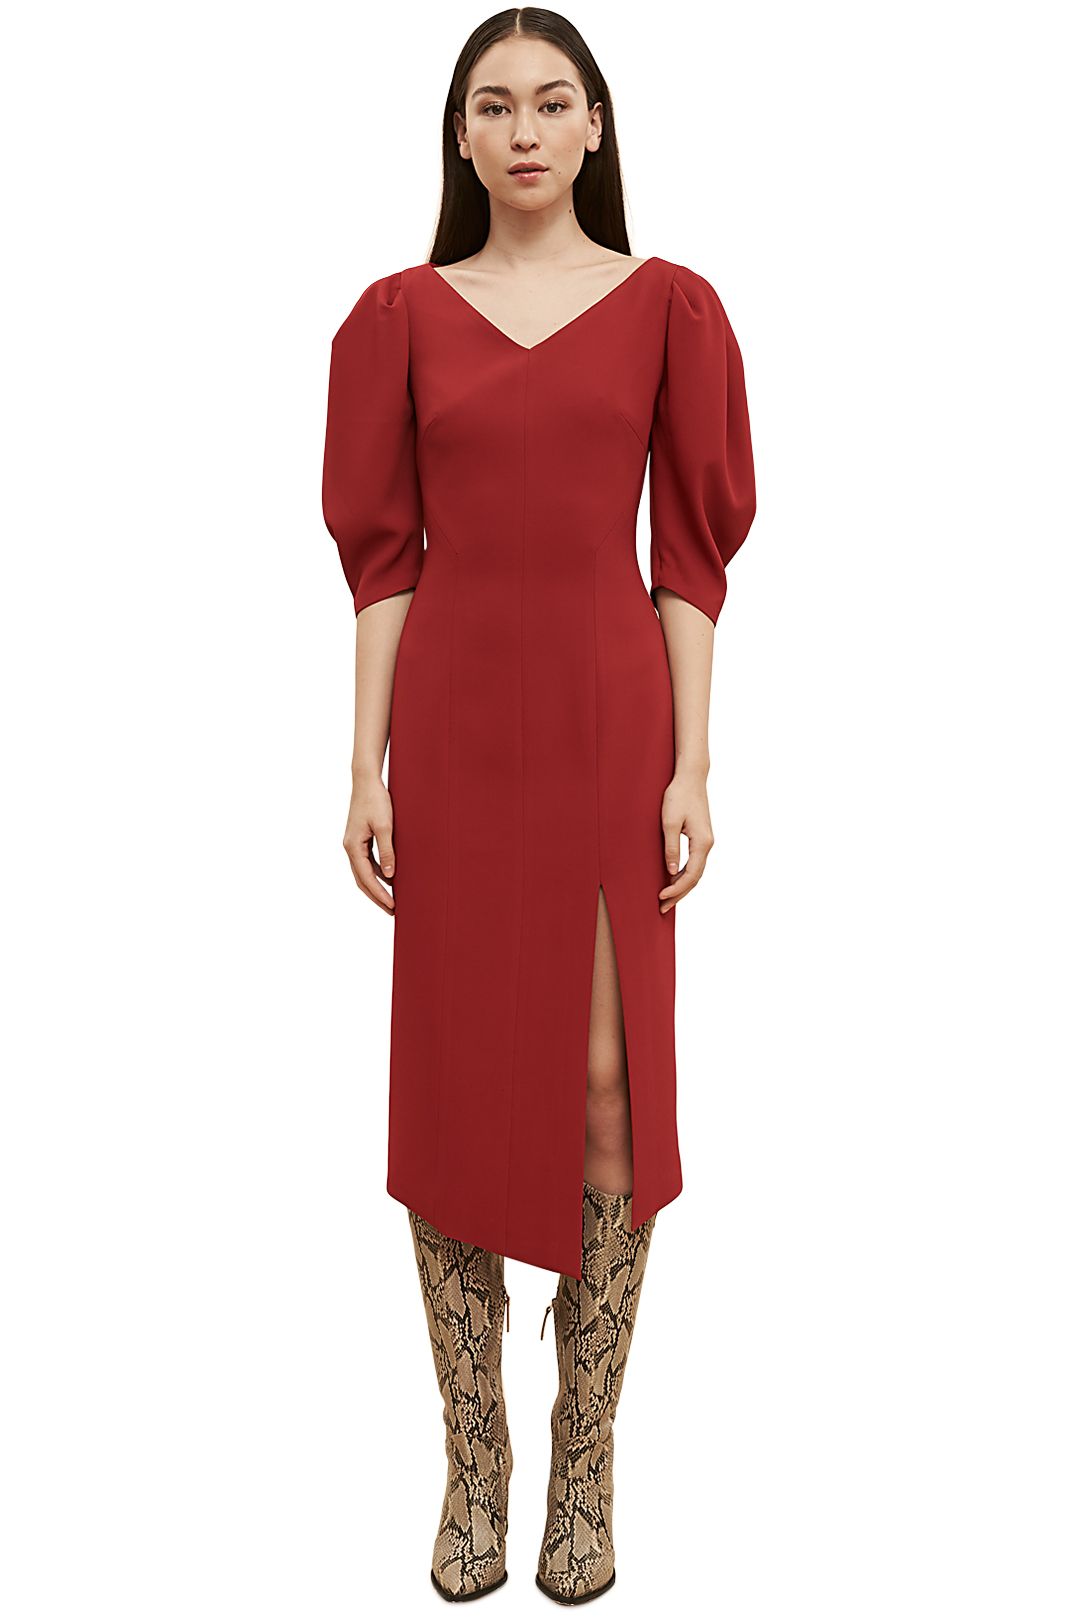 Ginger-and-Smart-Equinox-Dress-Scarlet-Red-Front